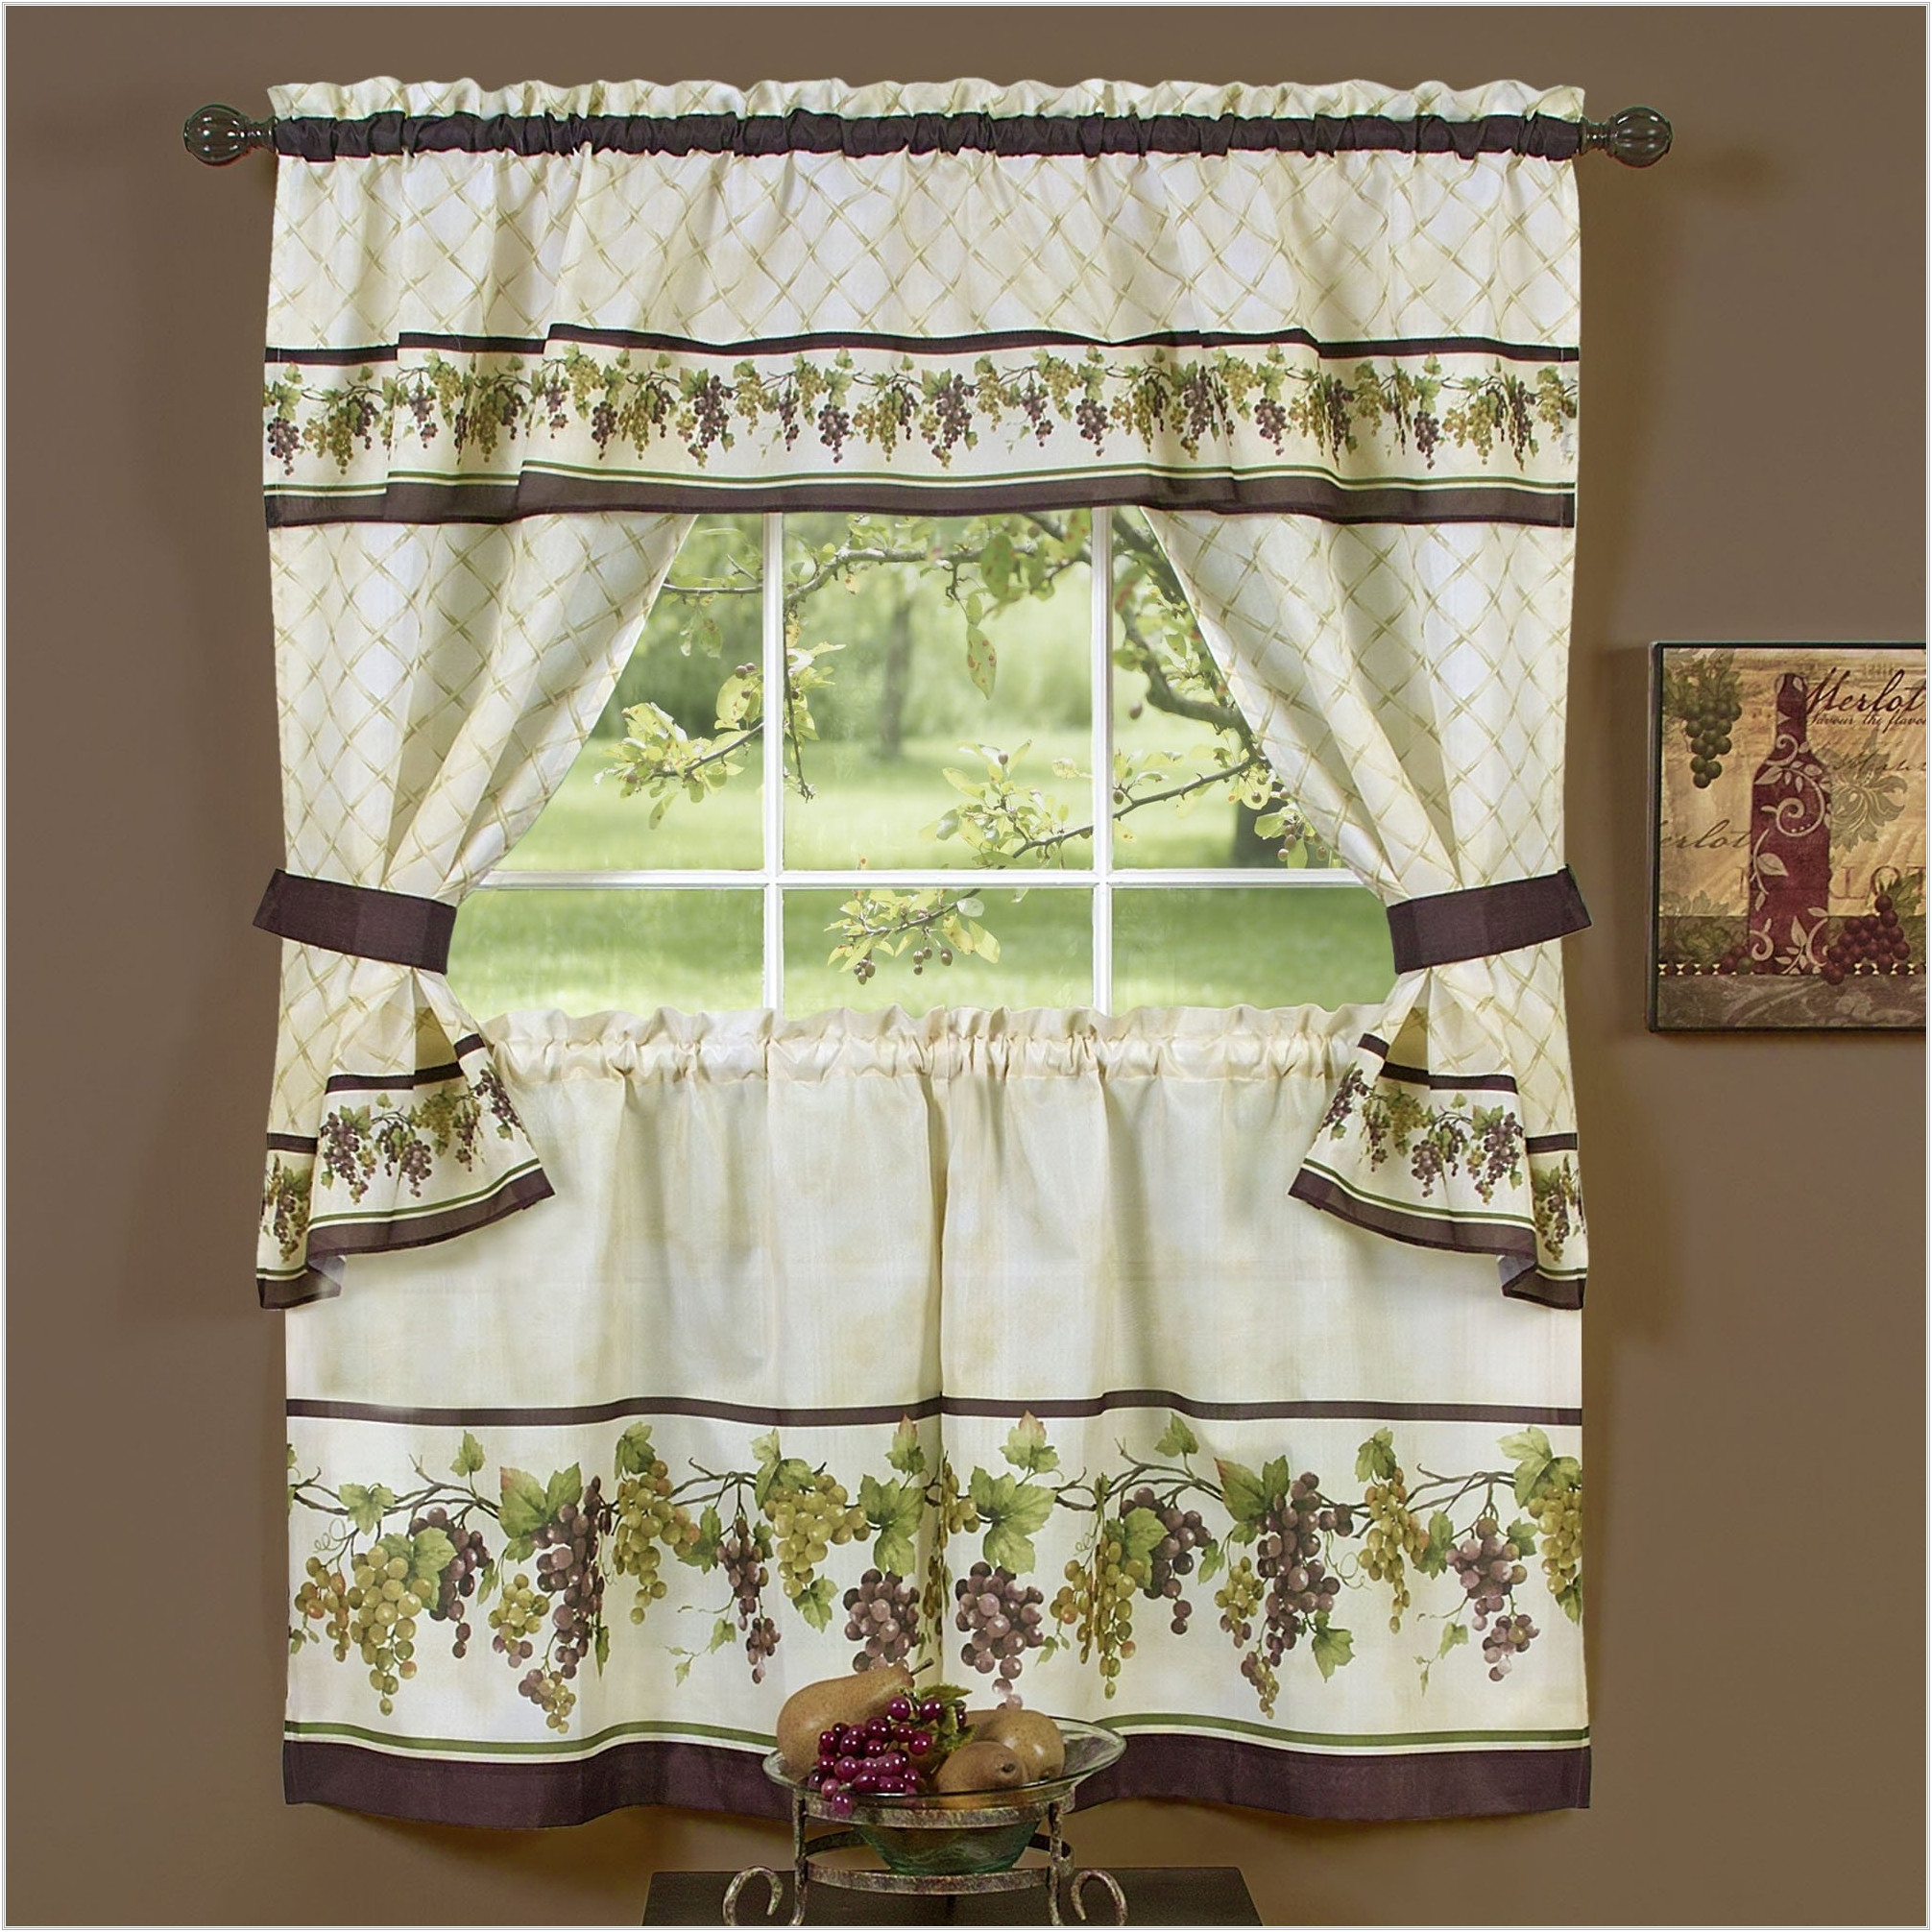 Jcpenney Living Room Curtains New Curtain Elegant Interior Home Decorating Ideas With Of Jcpenney Living Room Curtains 